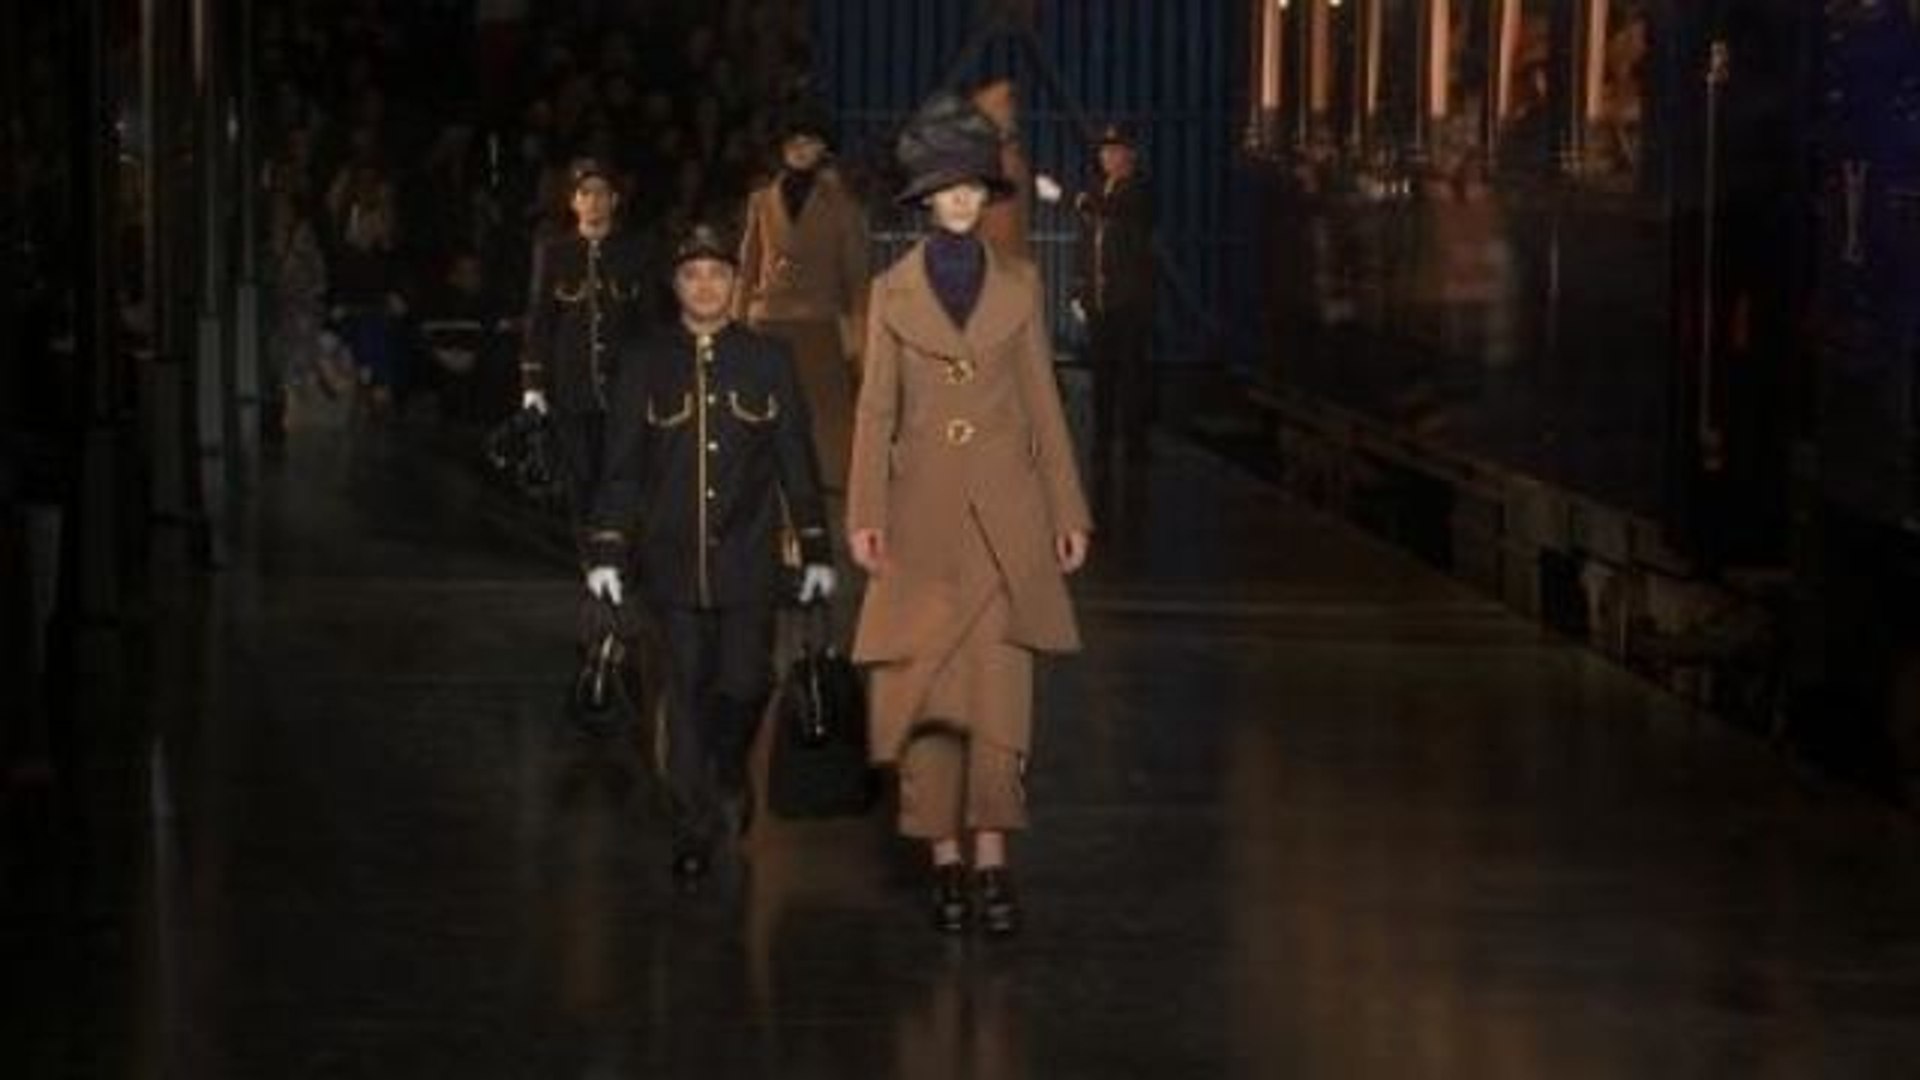 Louis Vuitton Fall 2012 Ready-to-Wear Collection